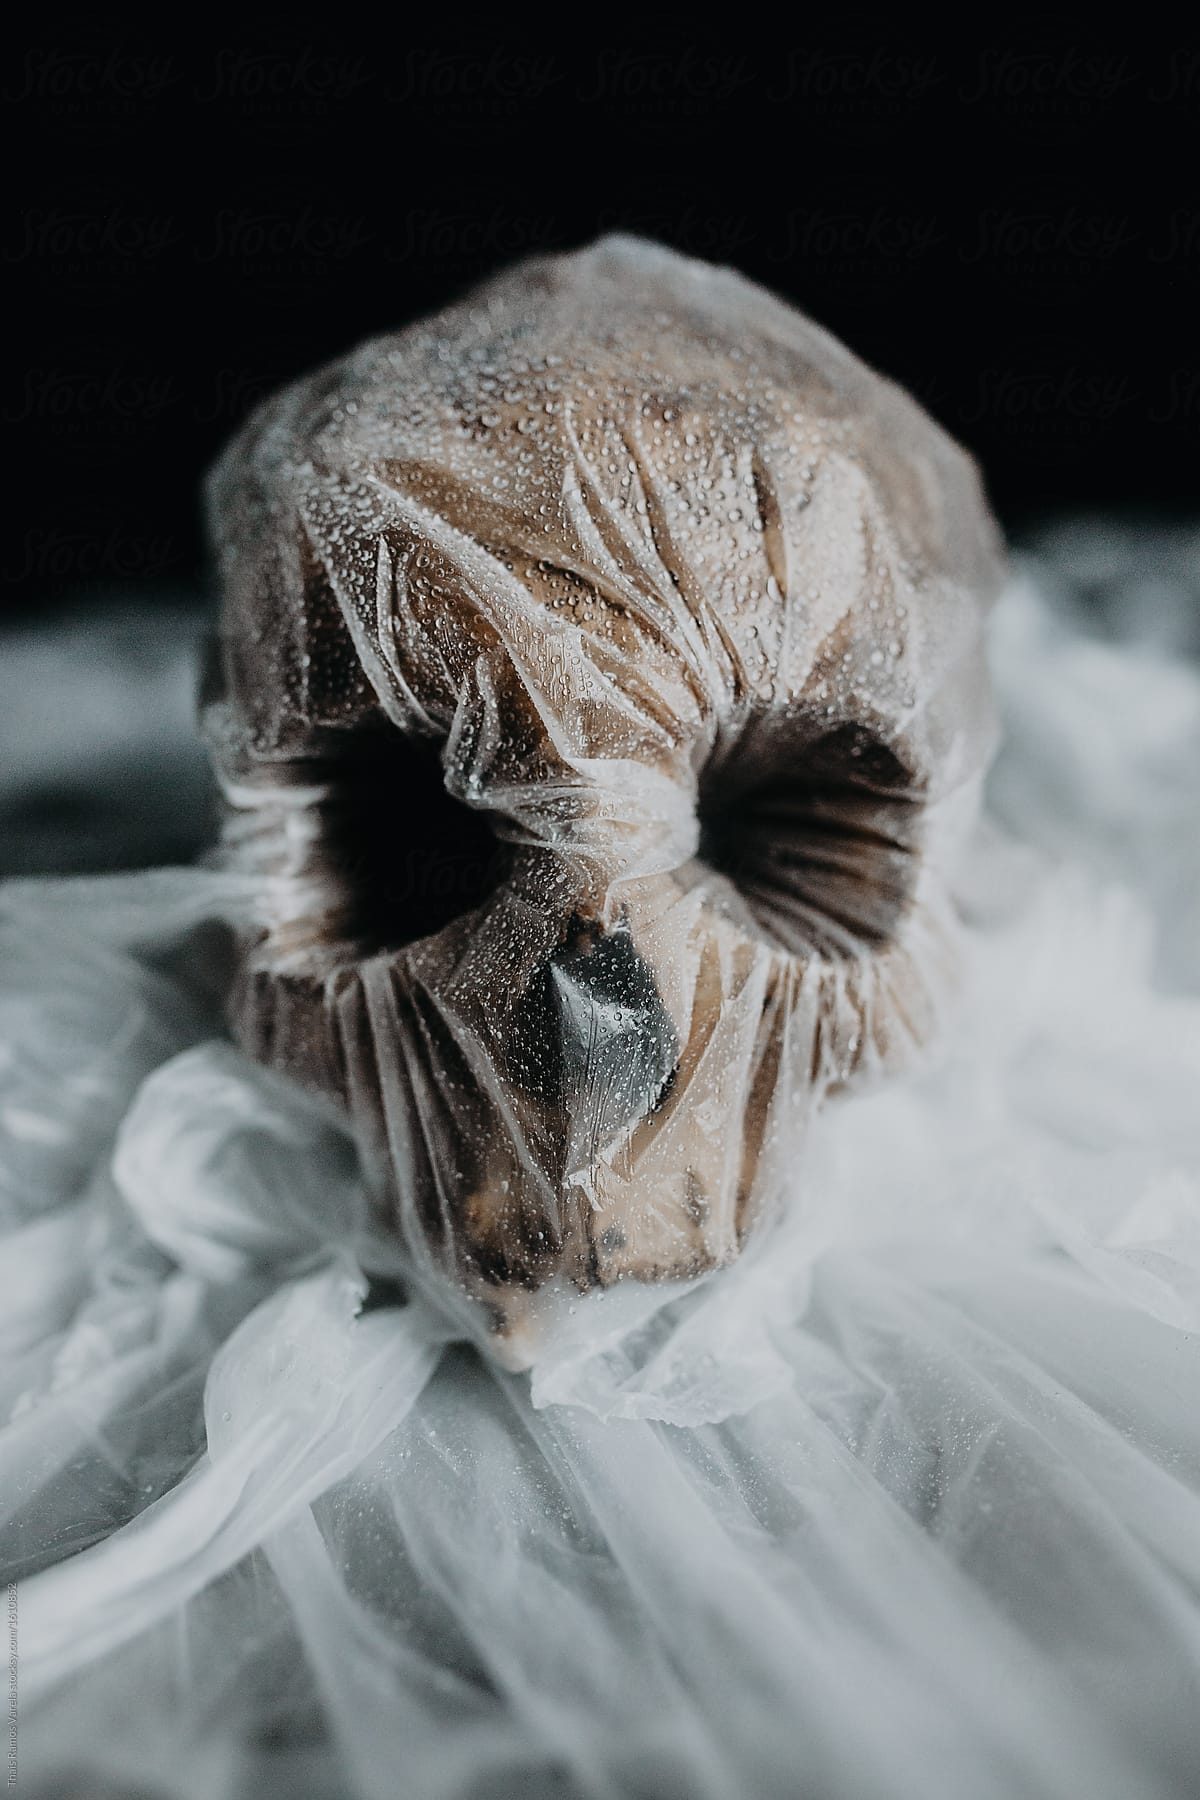 human skull covered by plastic